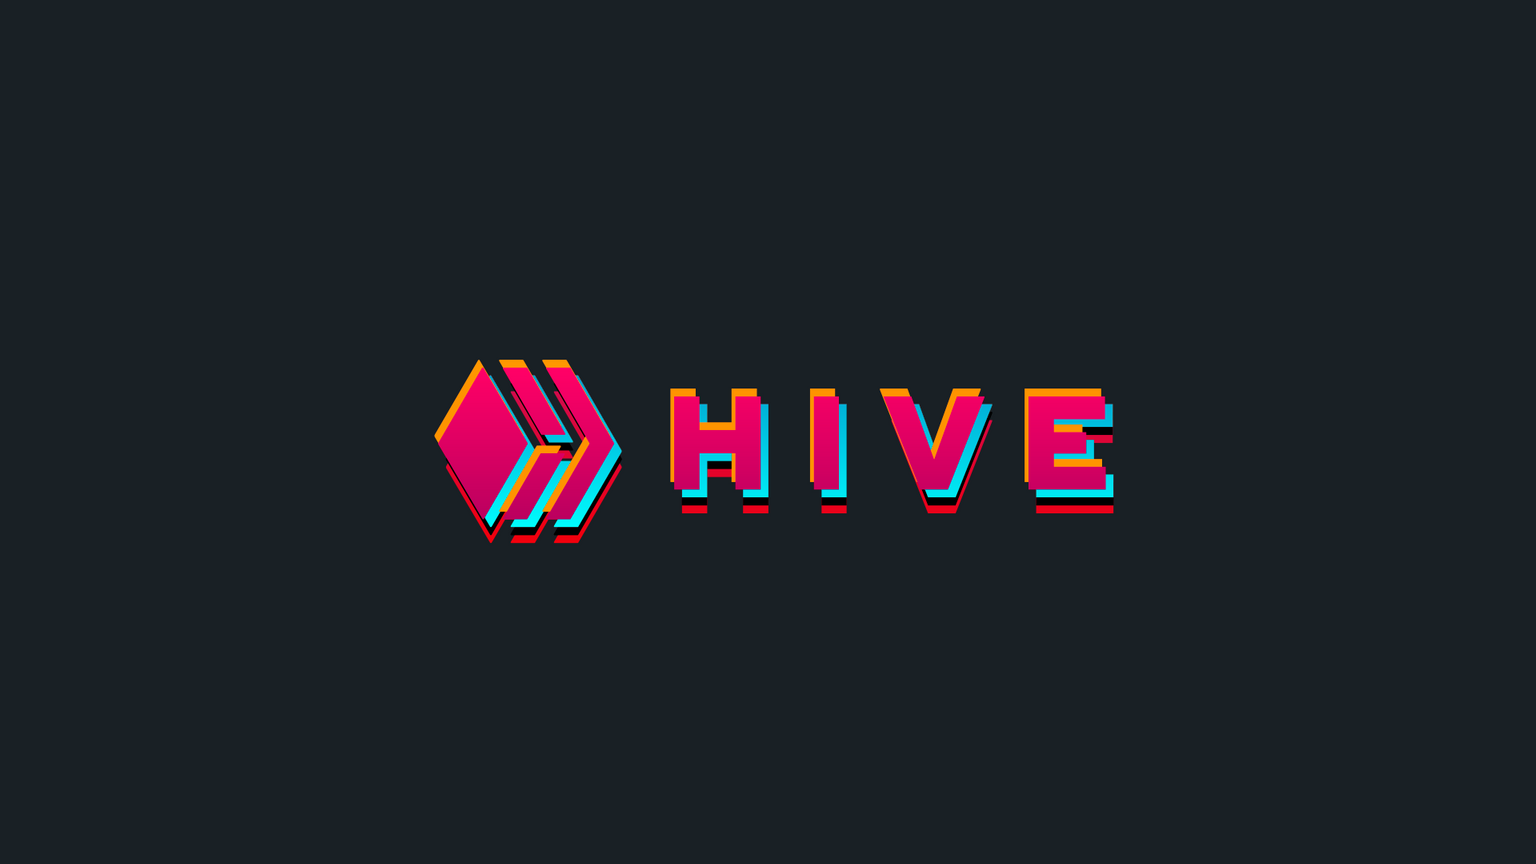 An 80s style Hive logo, where you can get free crypto from the Hive rewards pool.